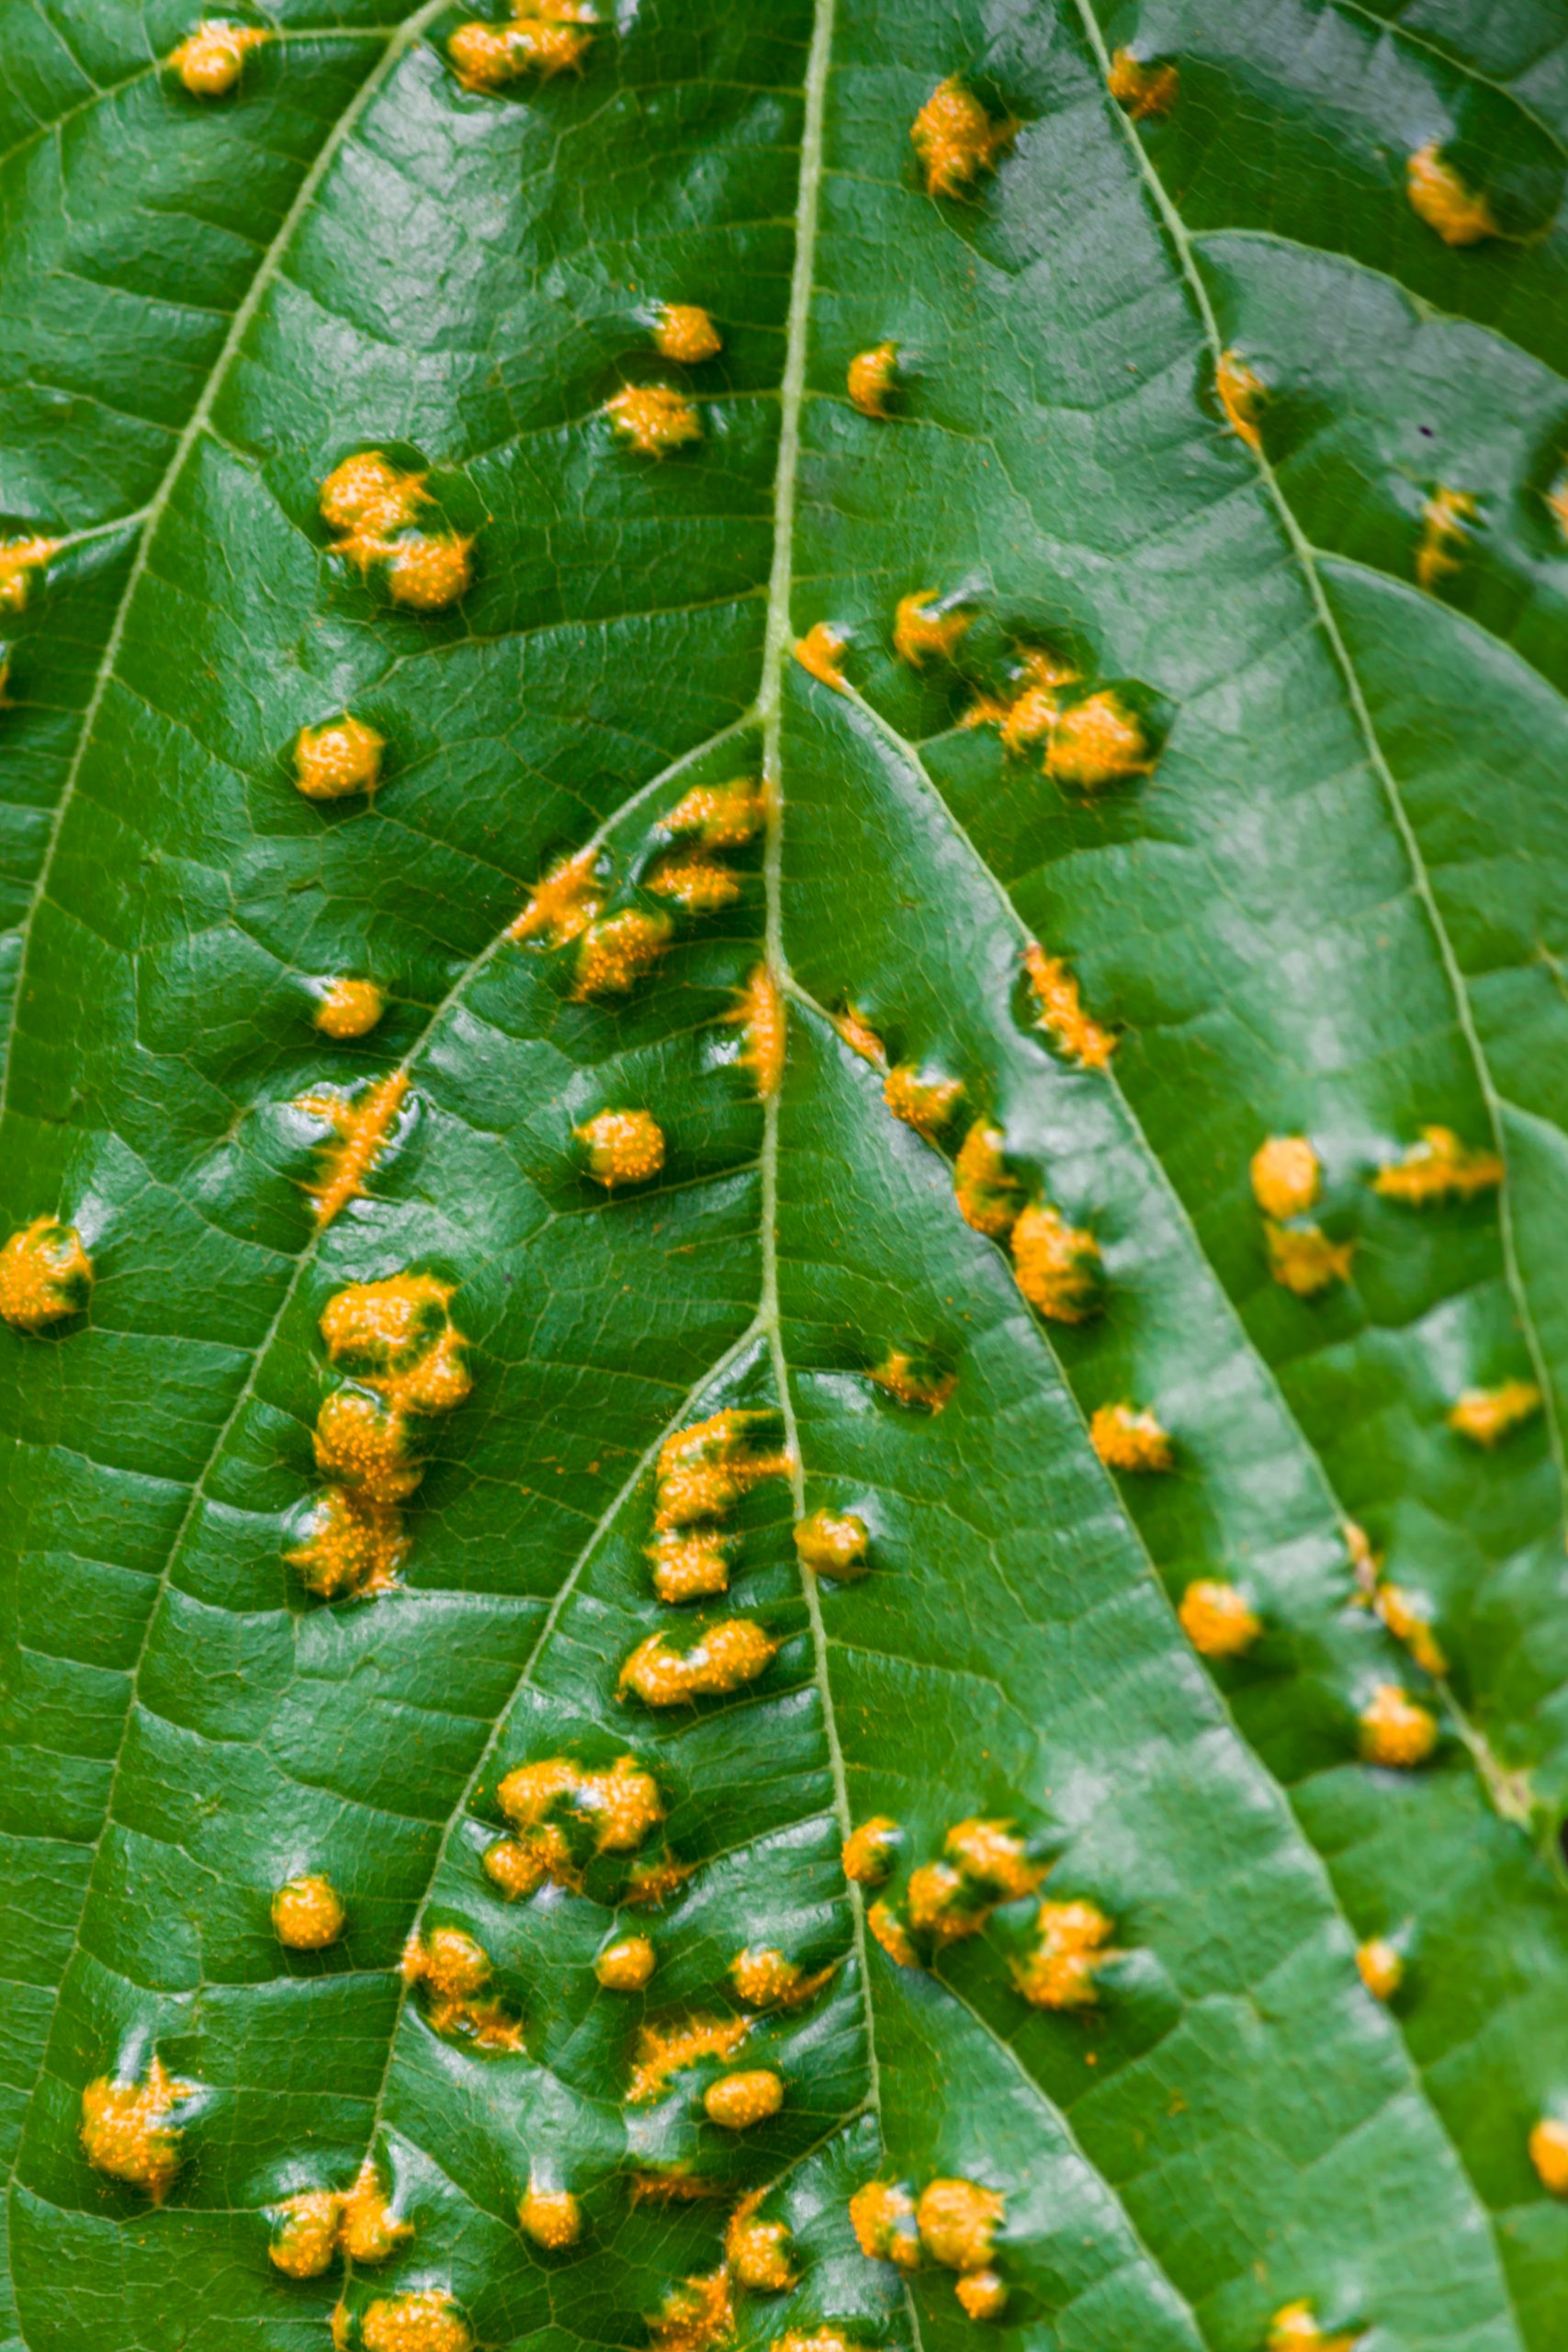 Yellow spots on a green leaf